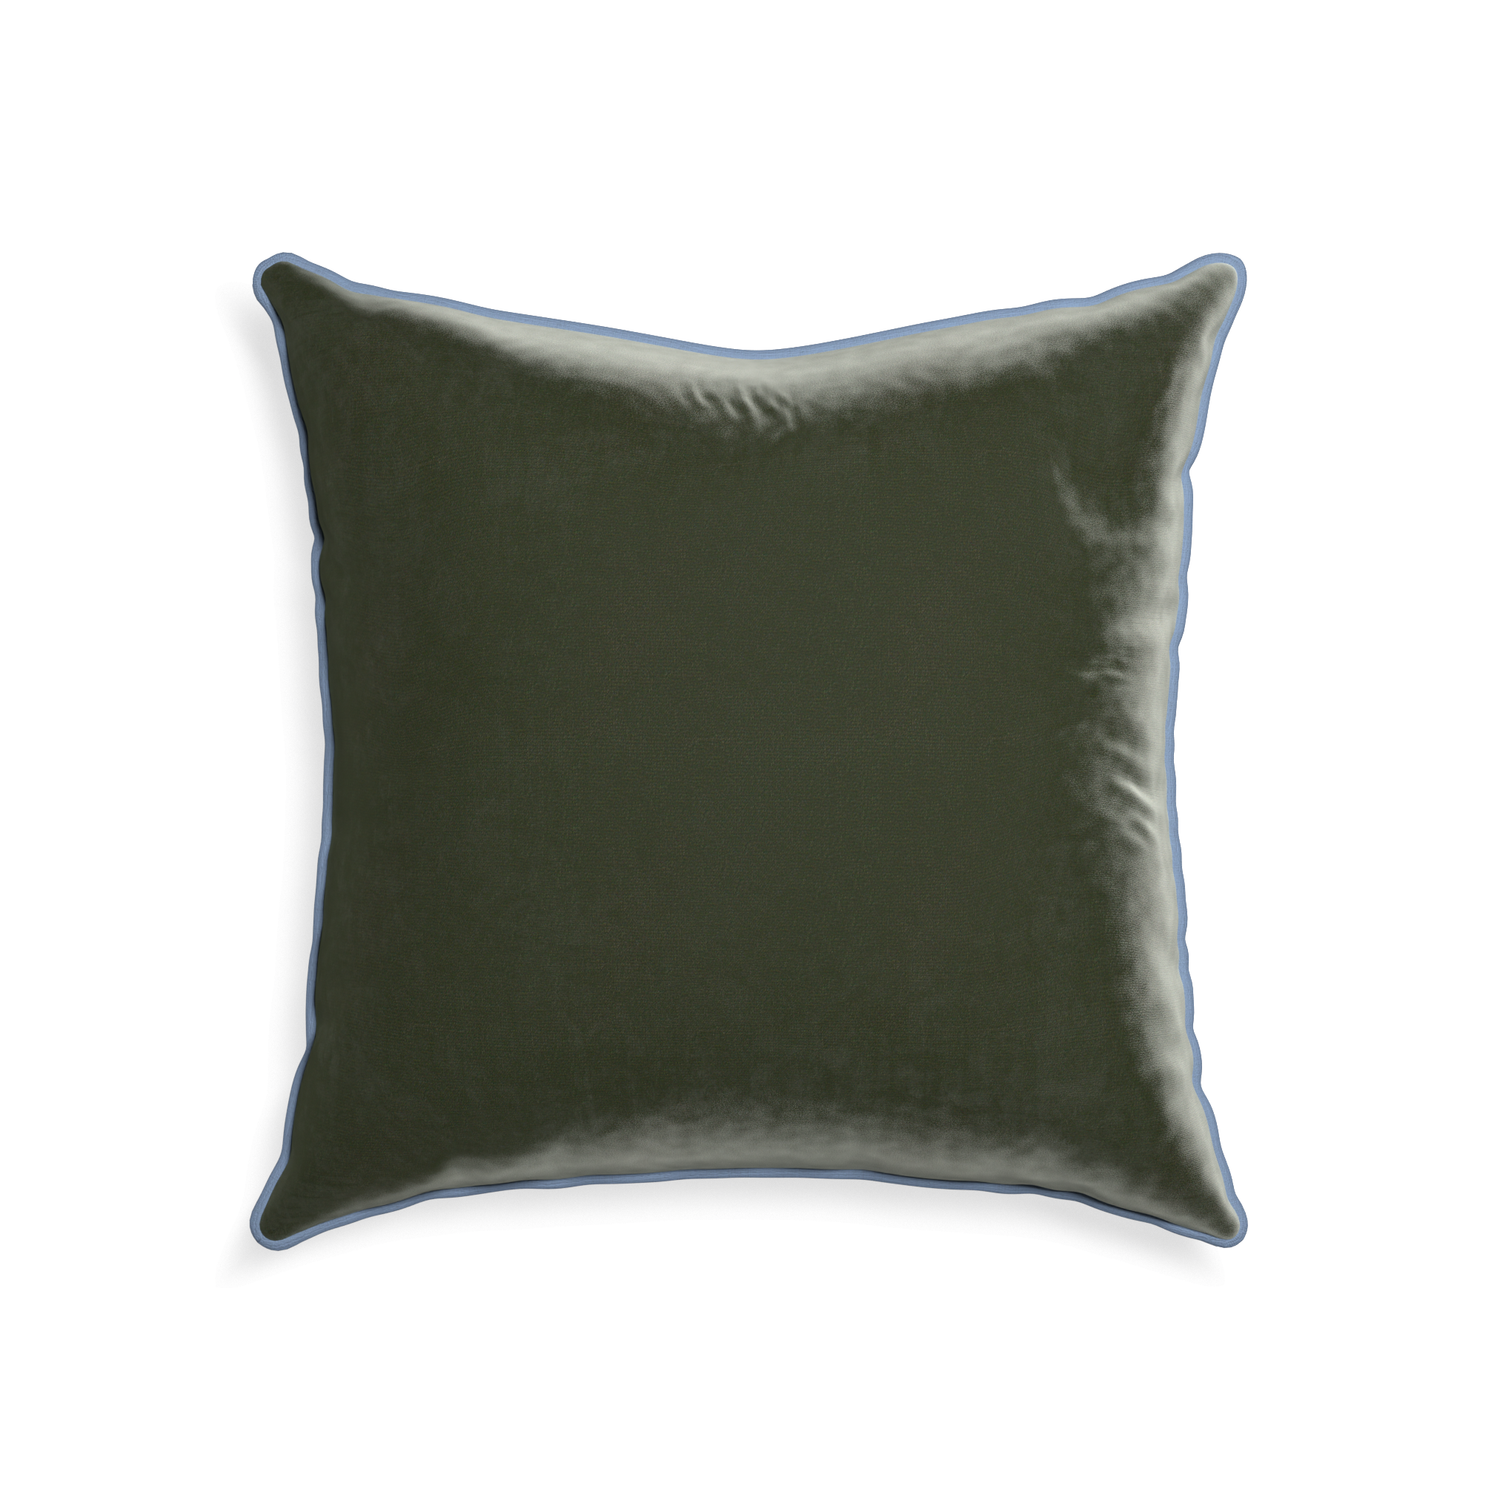 square fern green velvet pillow with sky blue piping